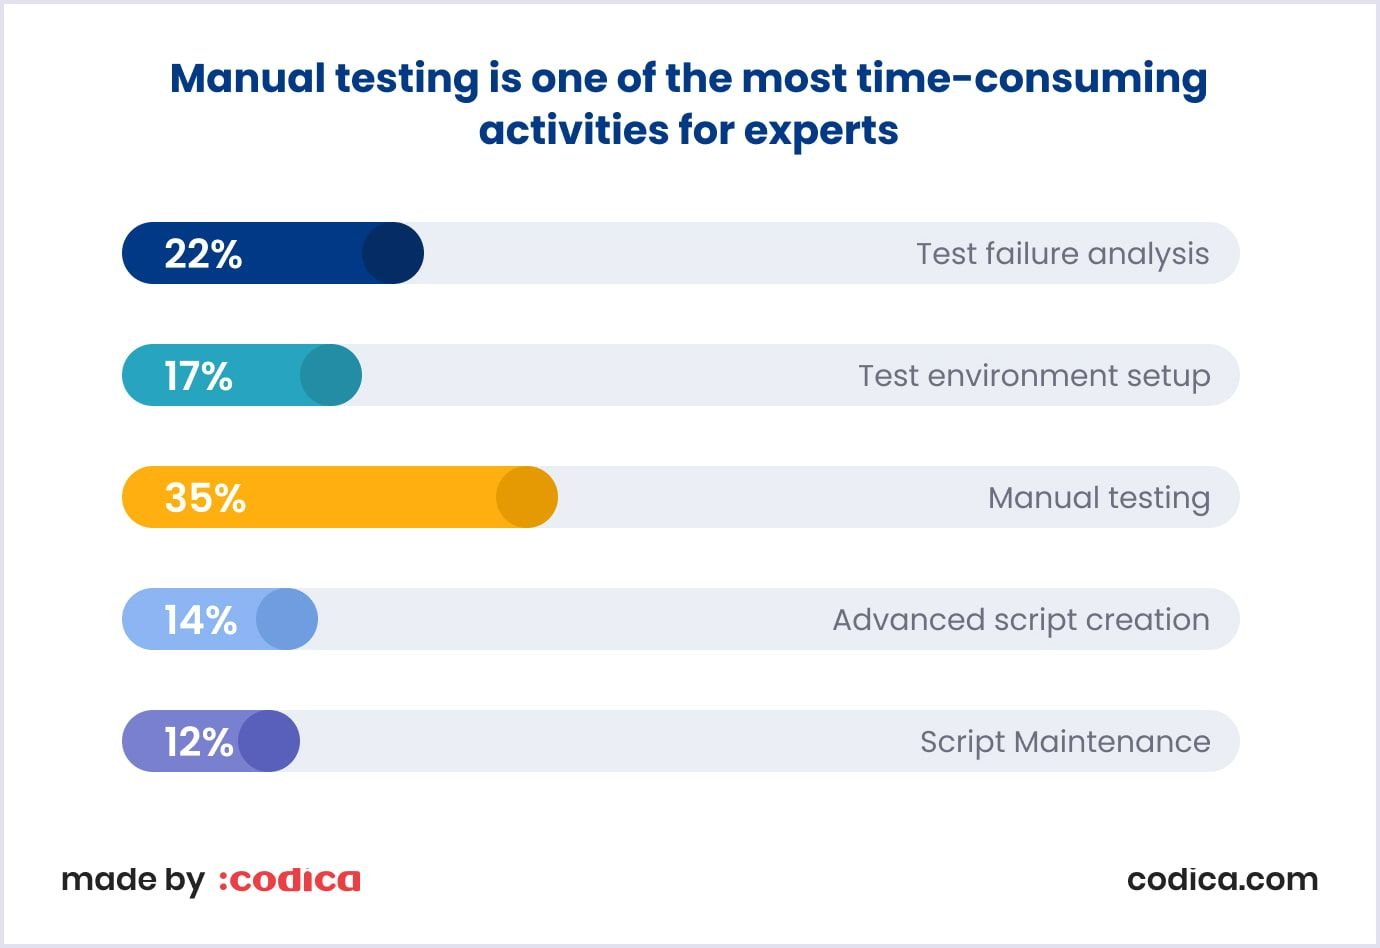 Testing manually is one of the most time-consuming activities